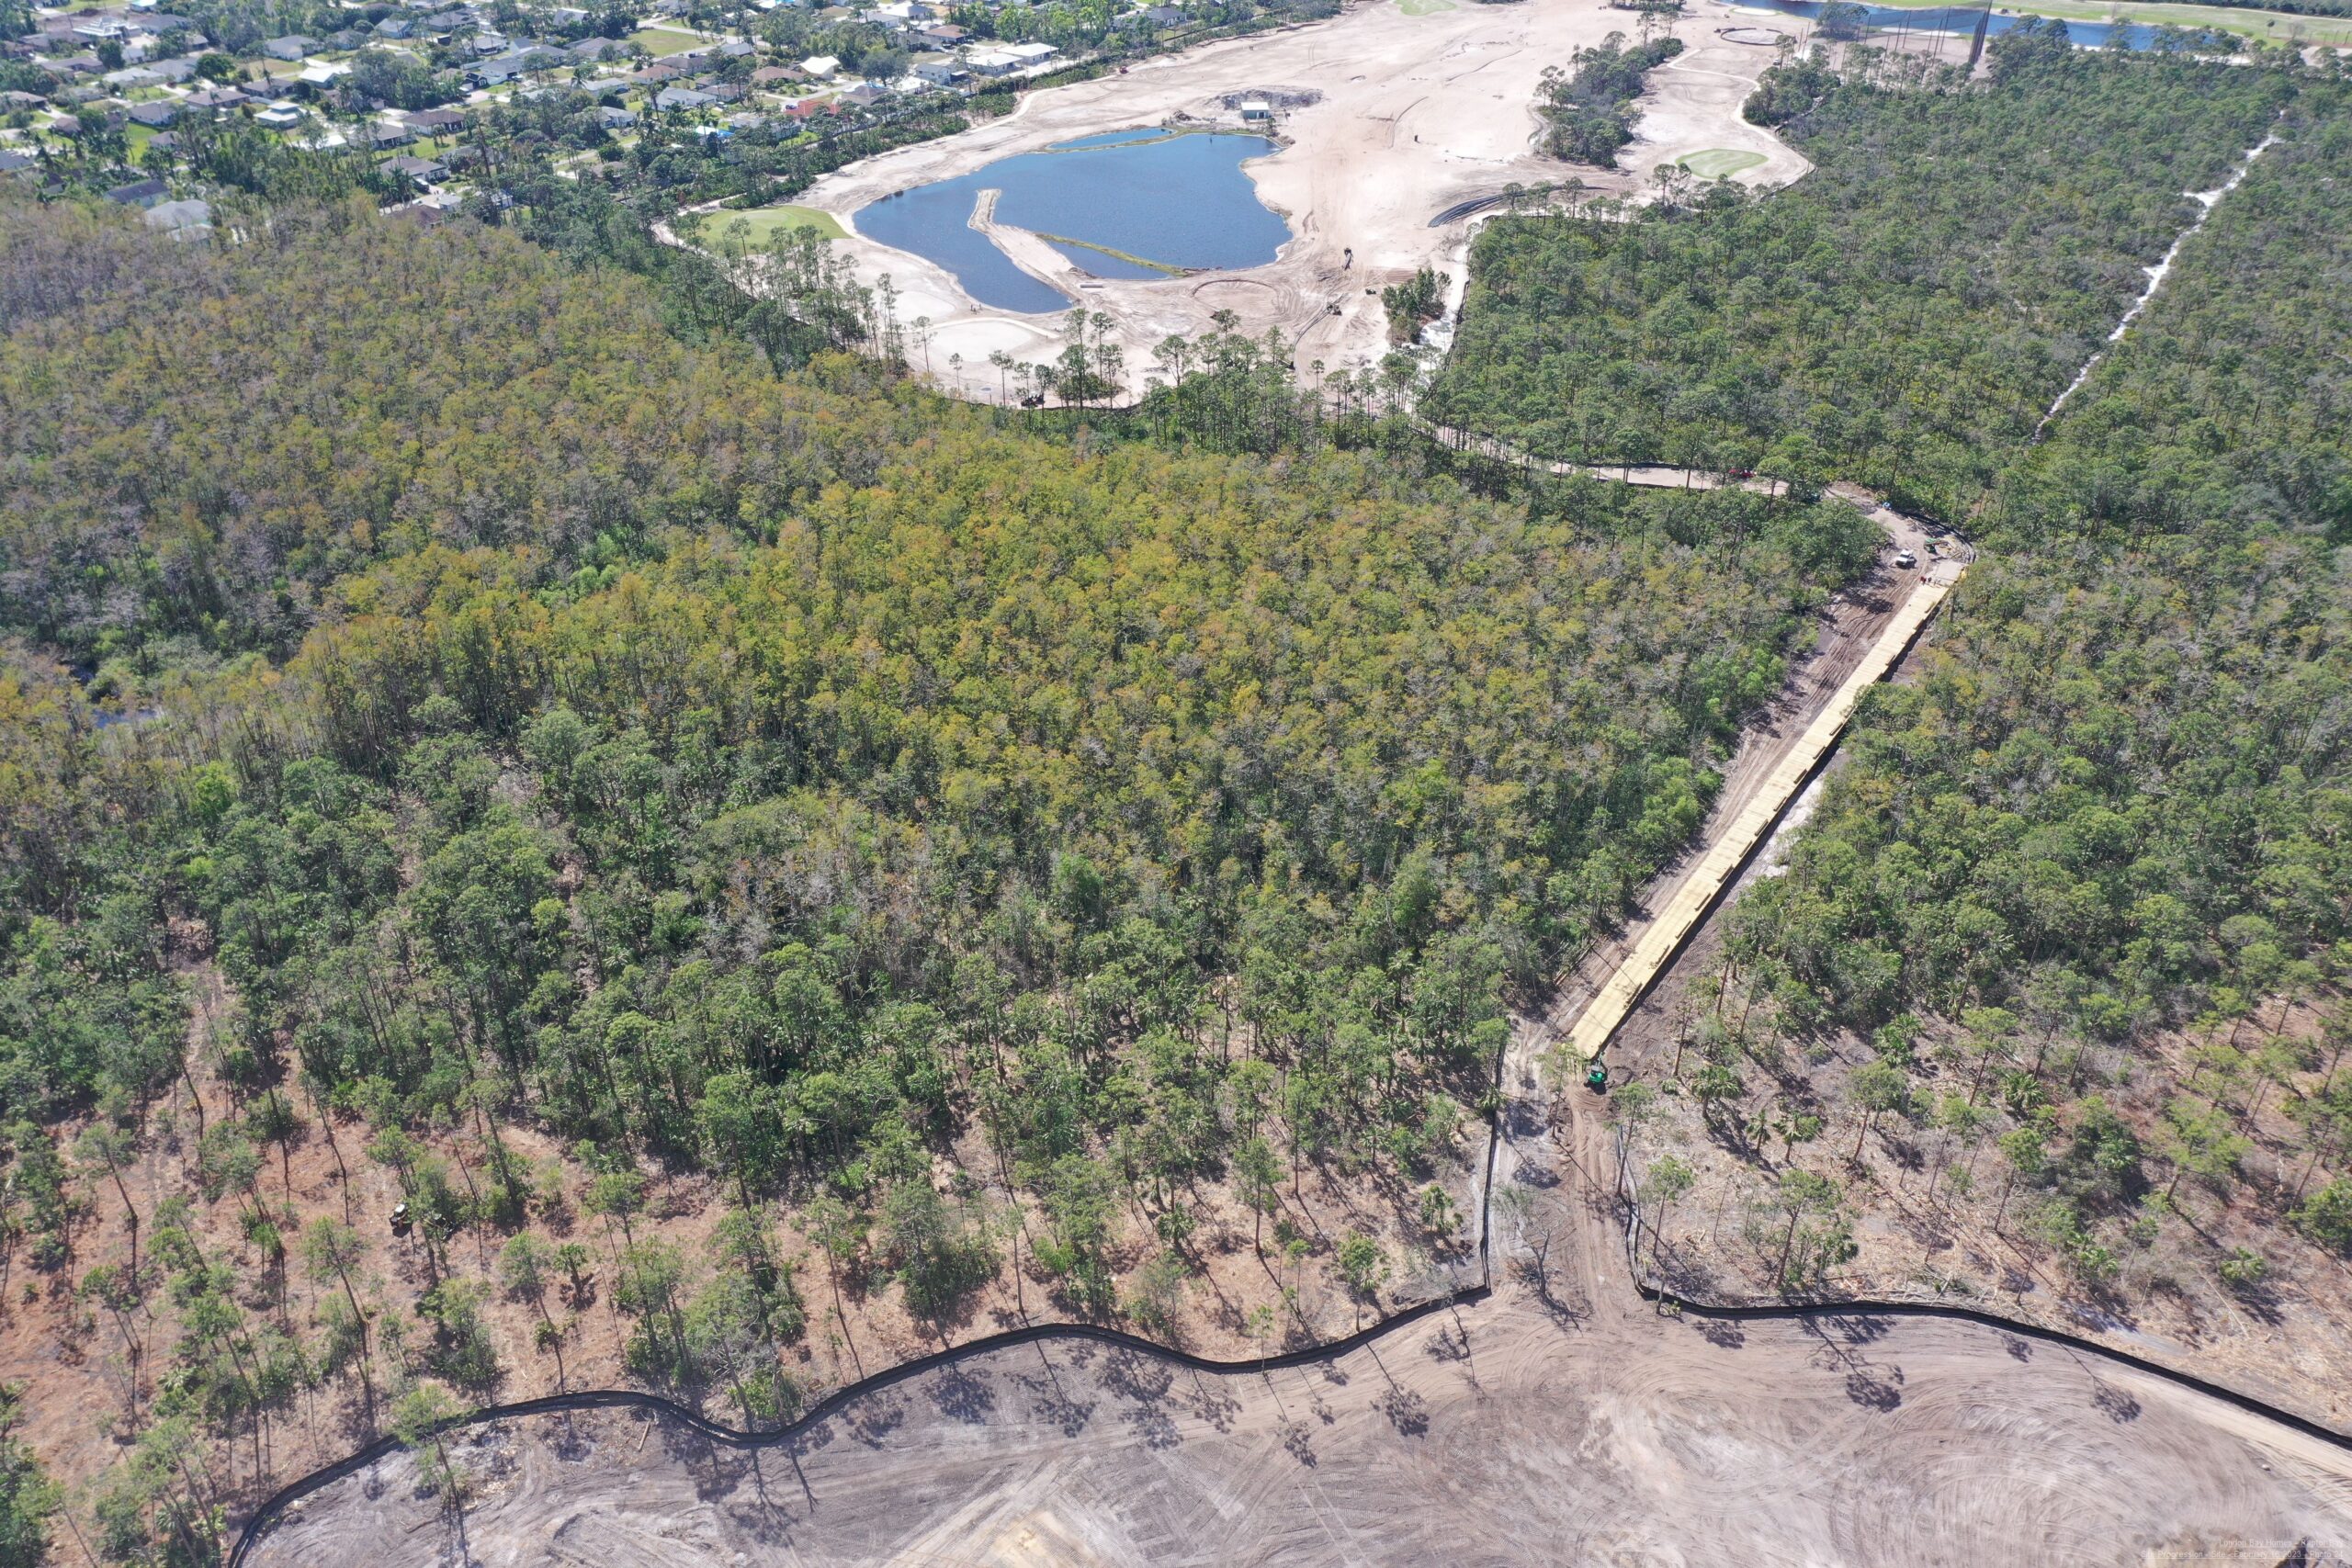 An aerial view of the Saltleaf Golf Preserve, a championship golf course located in Bonita Springs amidst a forest.